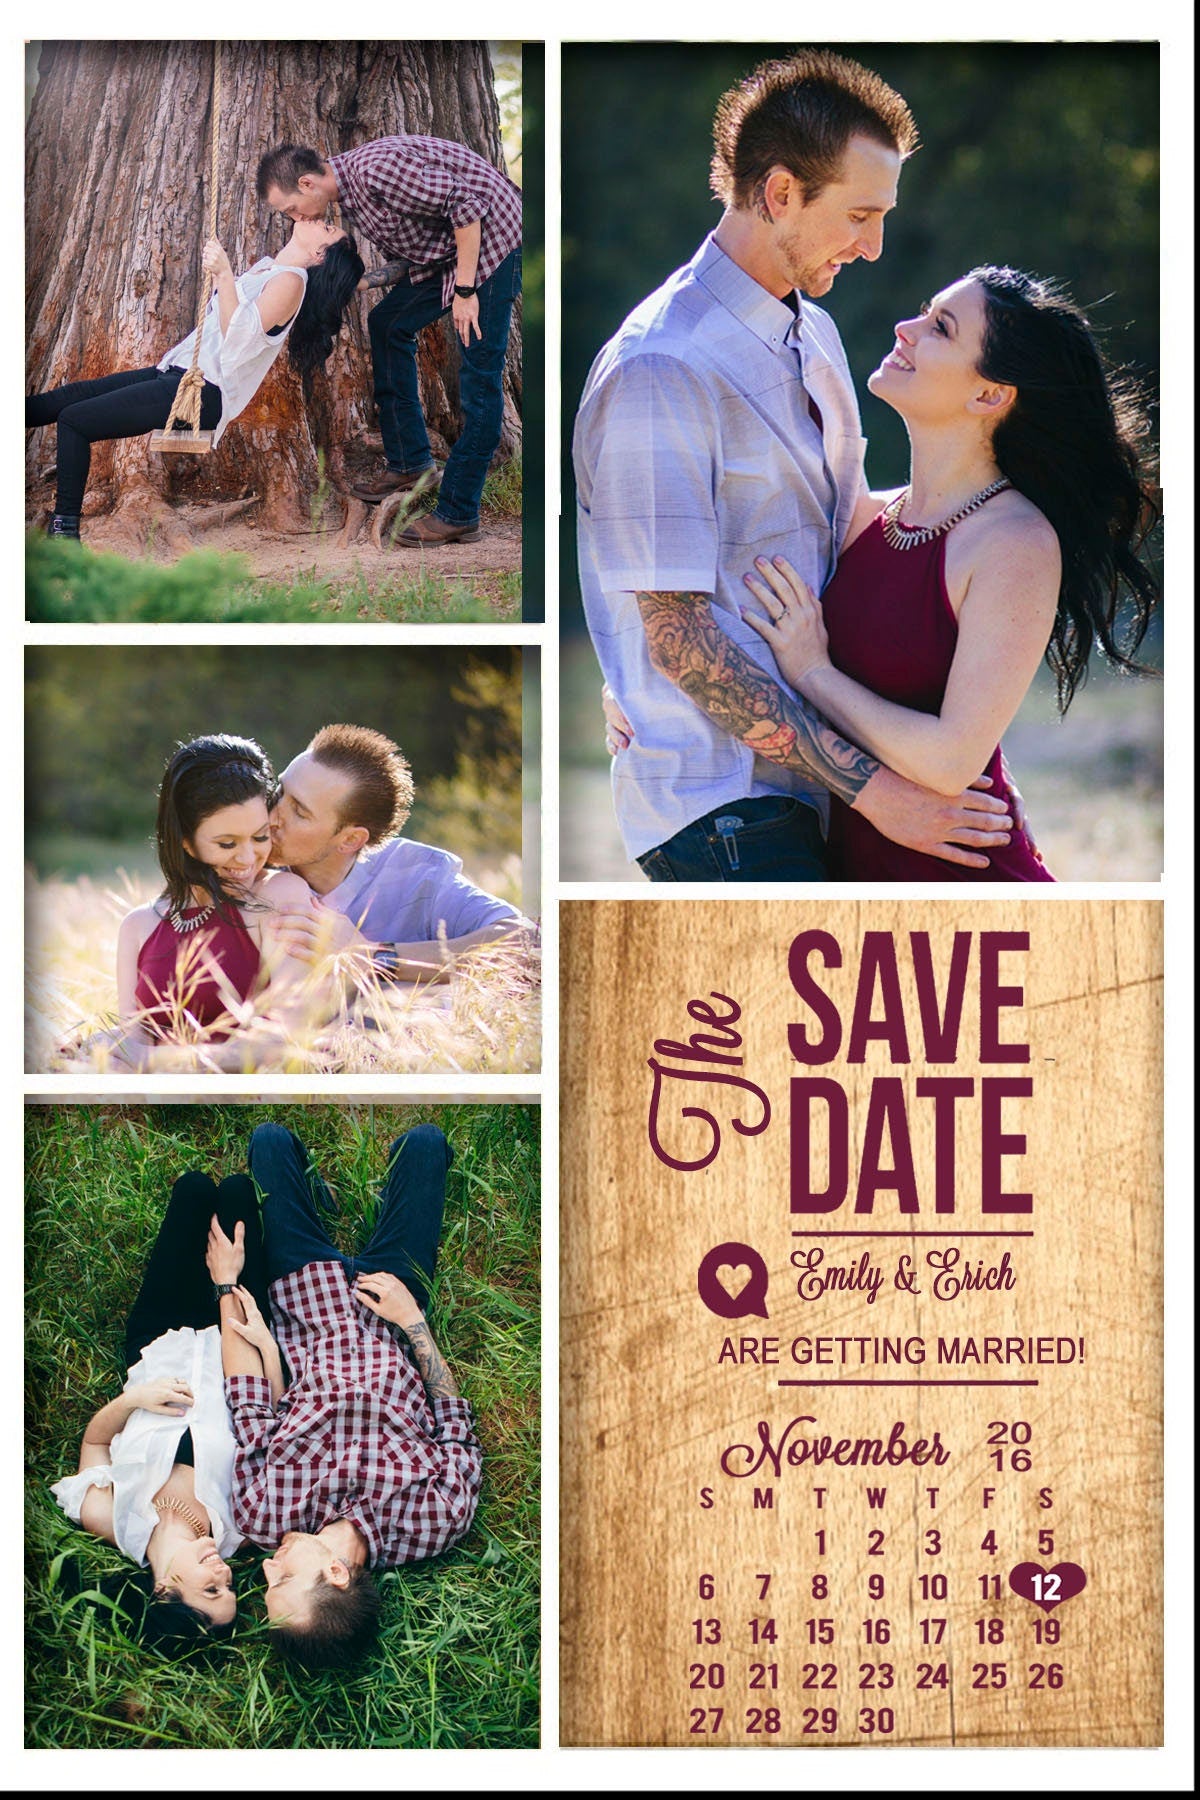 50 Save the Date Magnets, Photo Save the Date Magnets, Wedding Save the Date Magnets